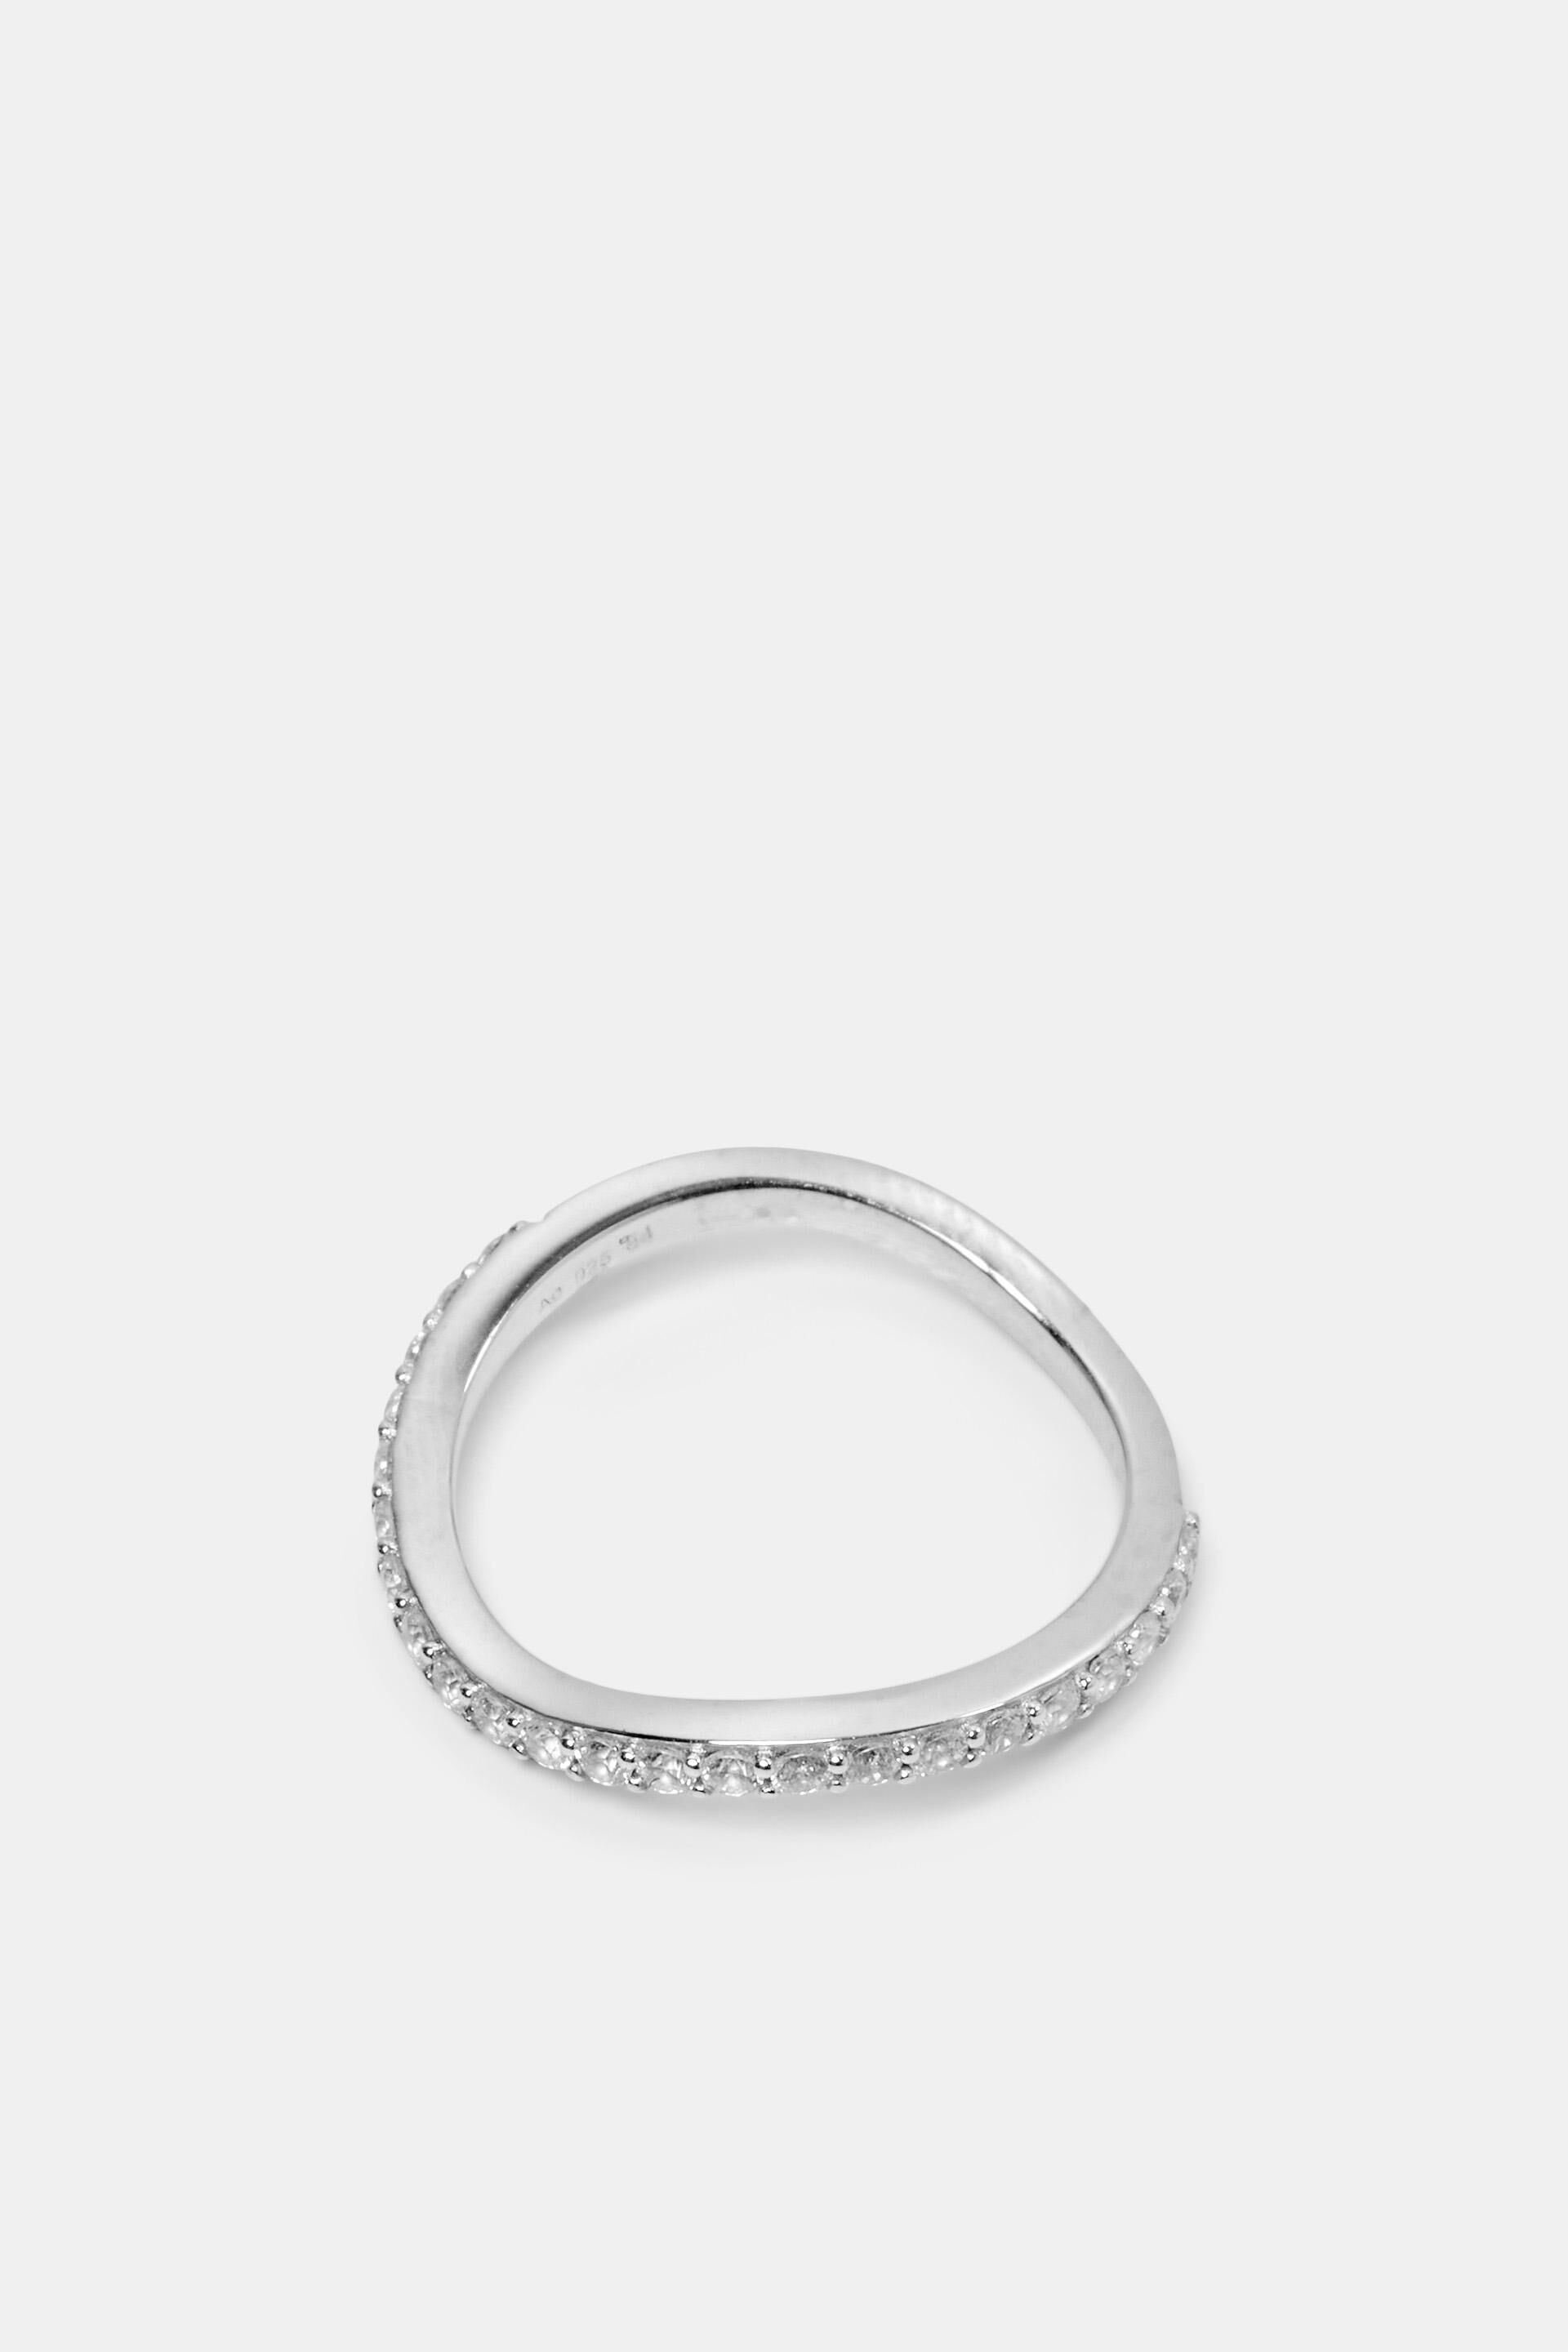 Esprit Wavy Ring Sterling Silver